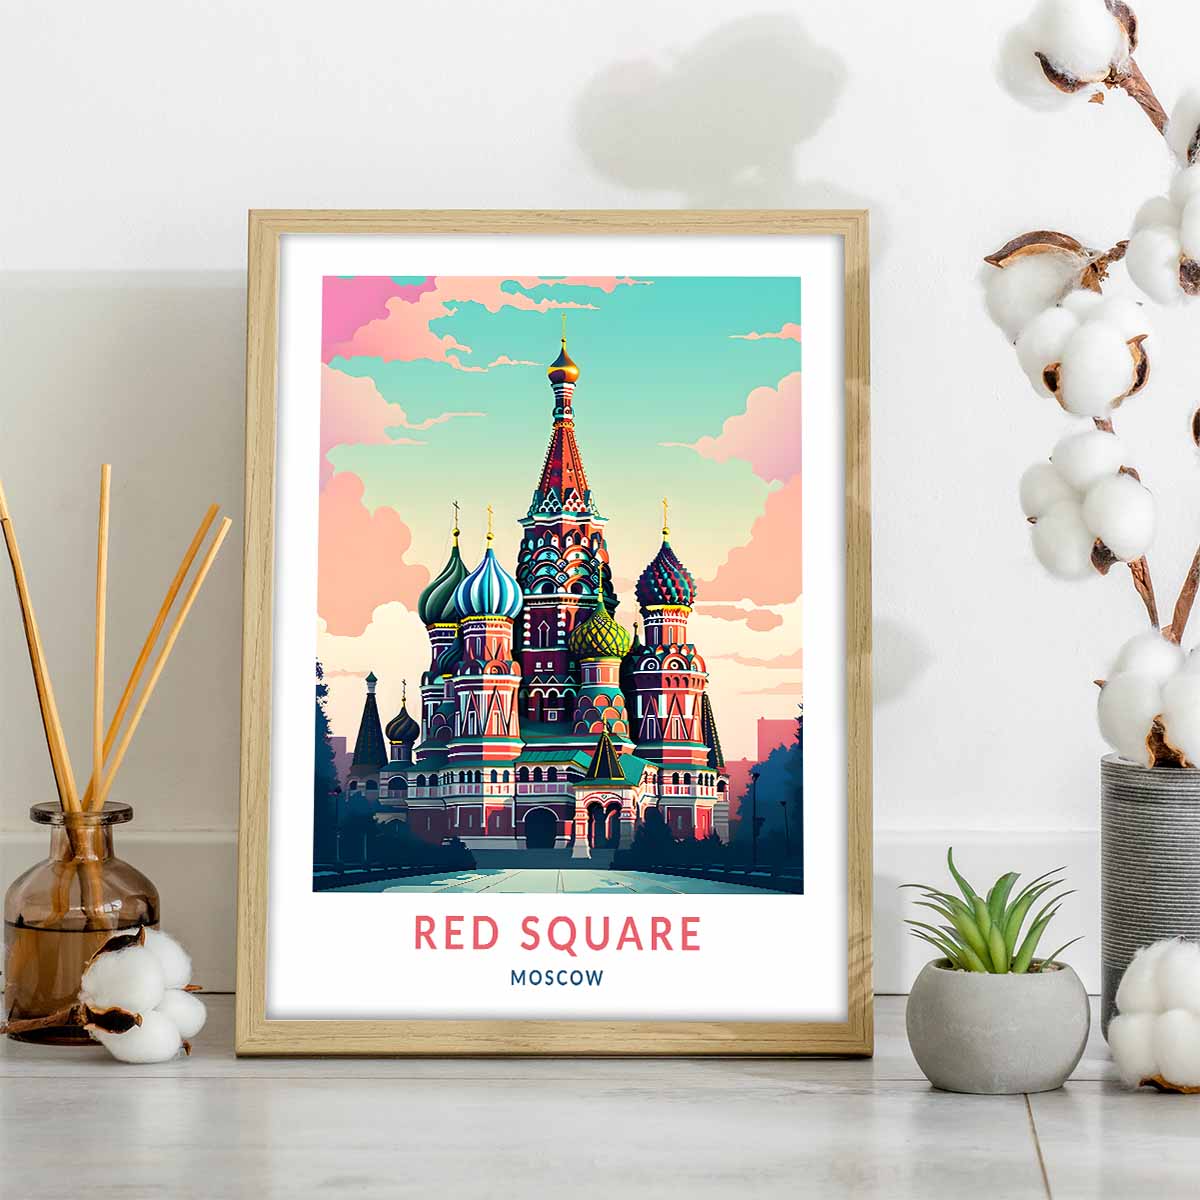 Russian Elegance Red Square Moscow Travel Art for Your Walls